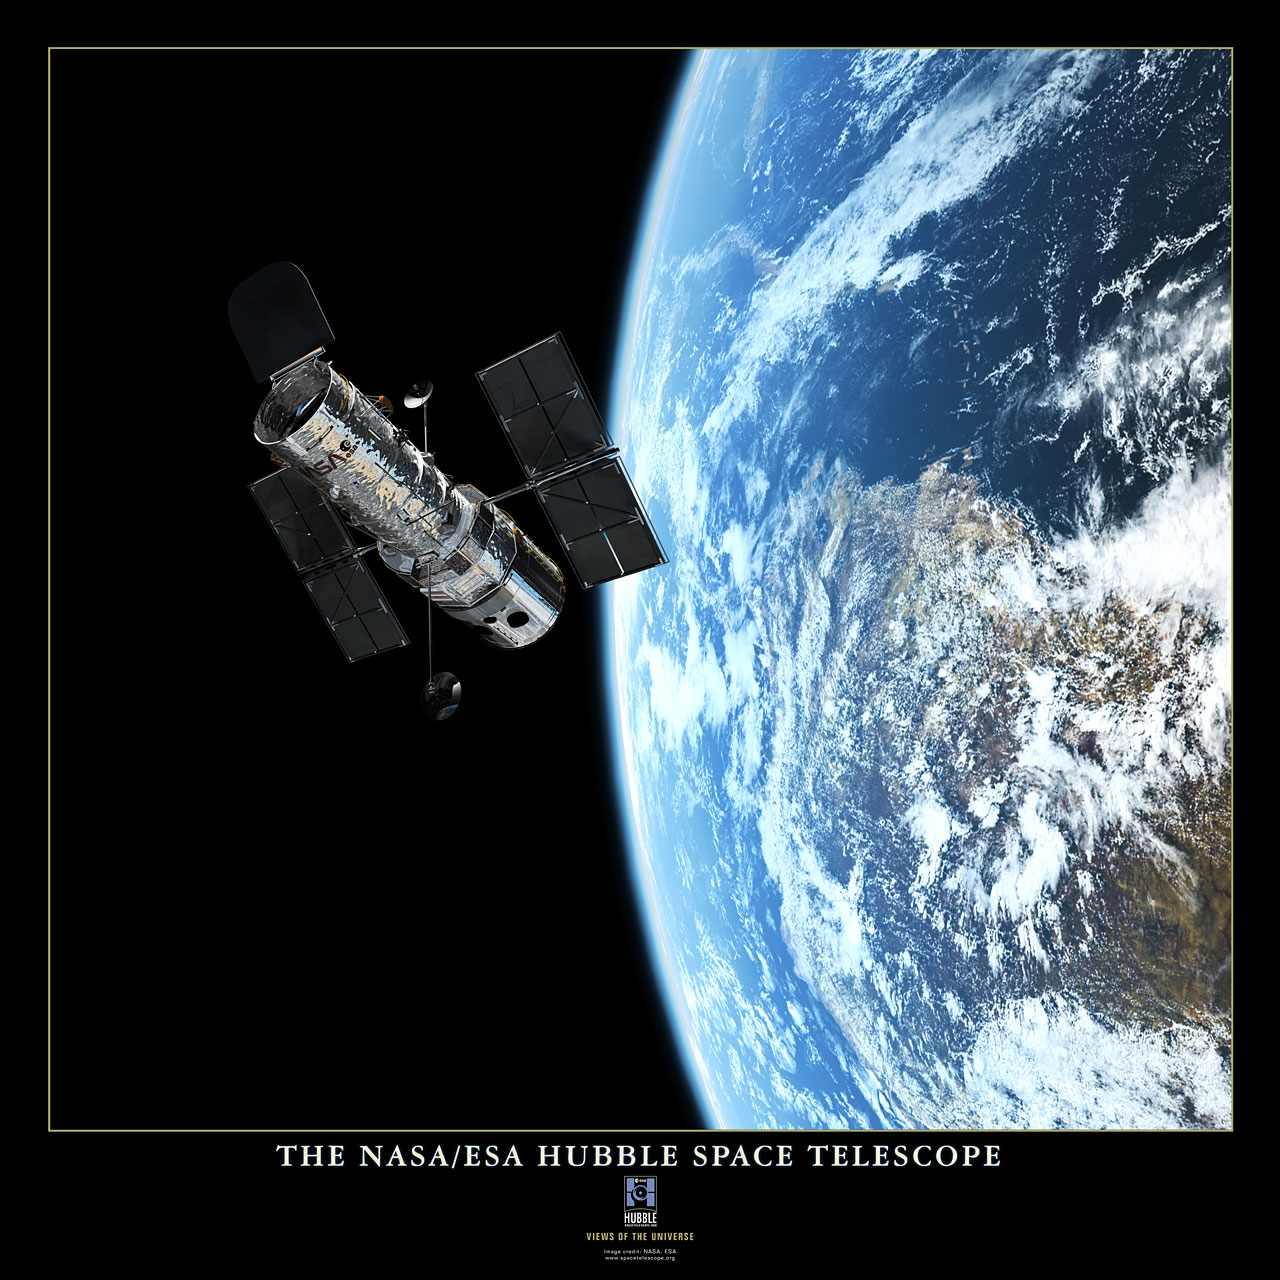 hubble imax movie poster